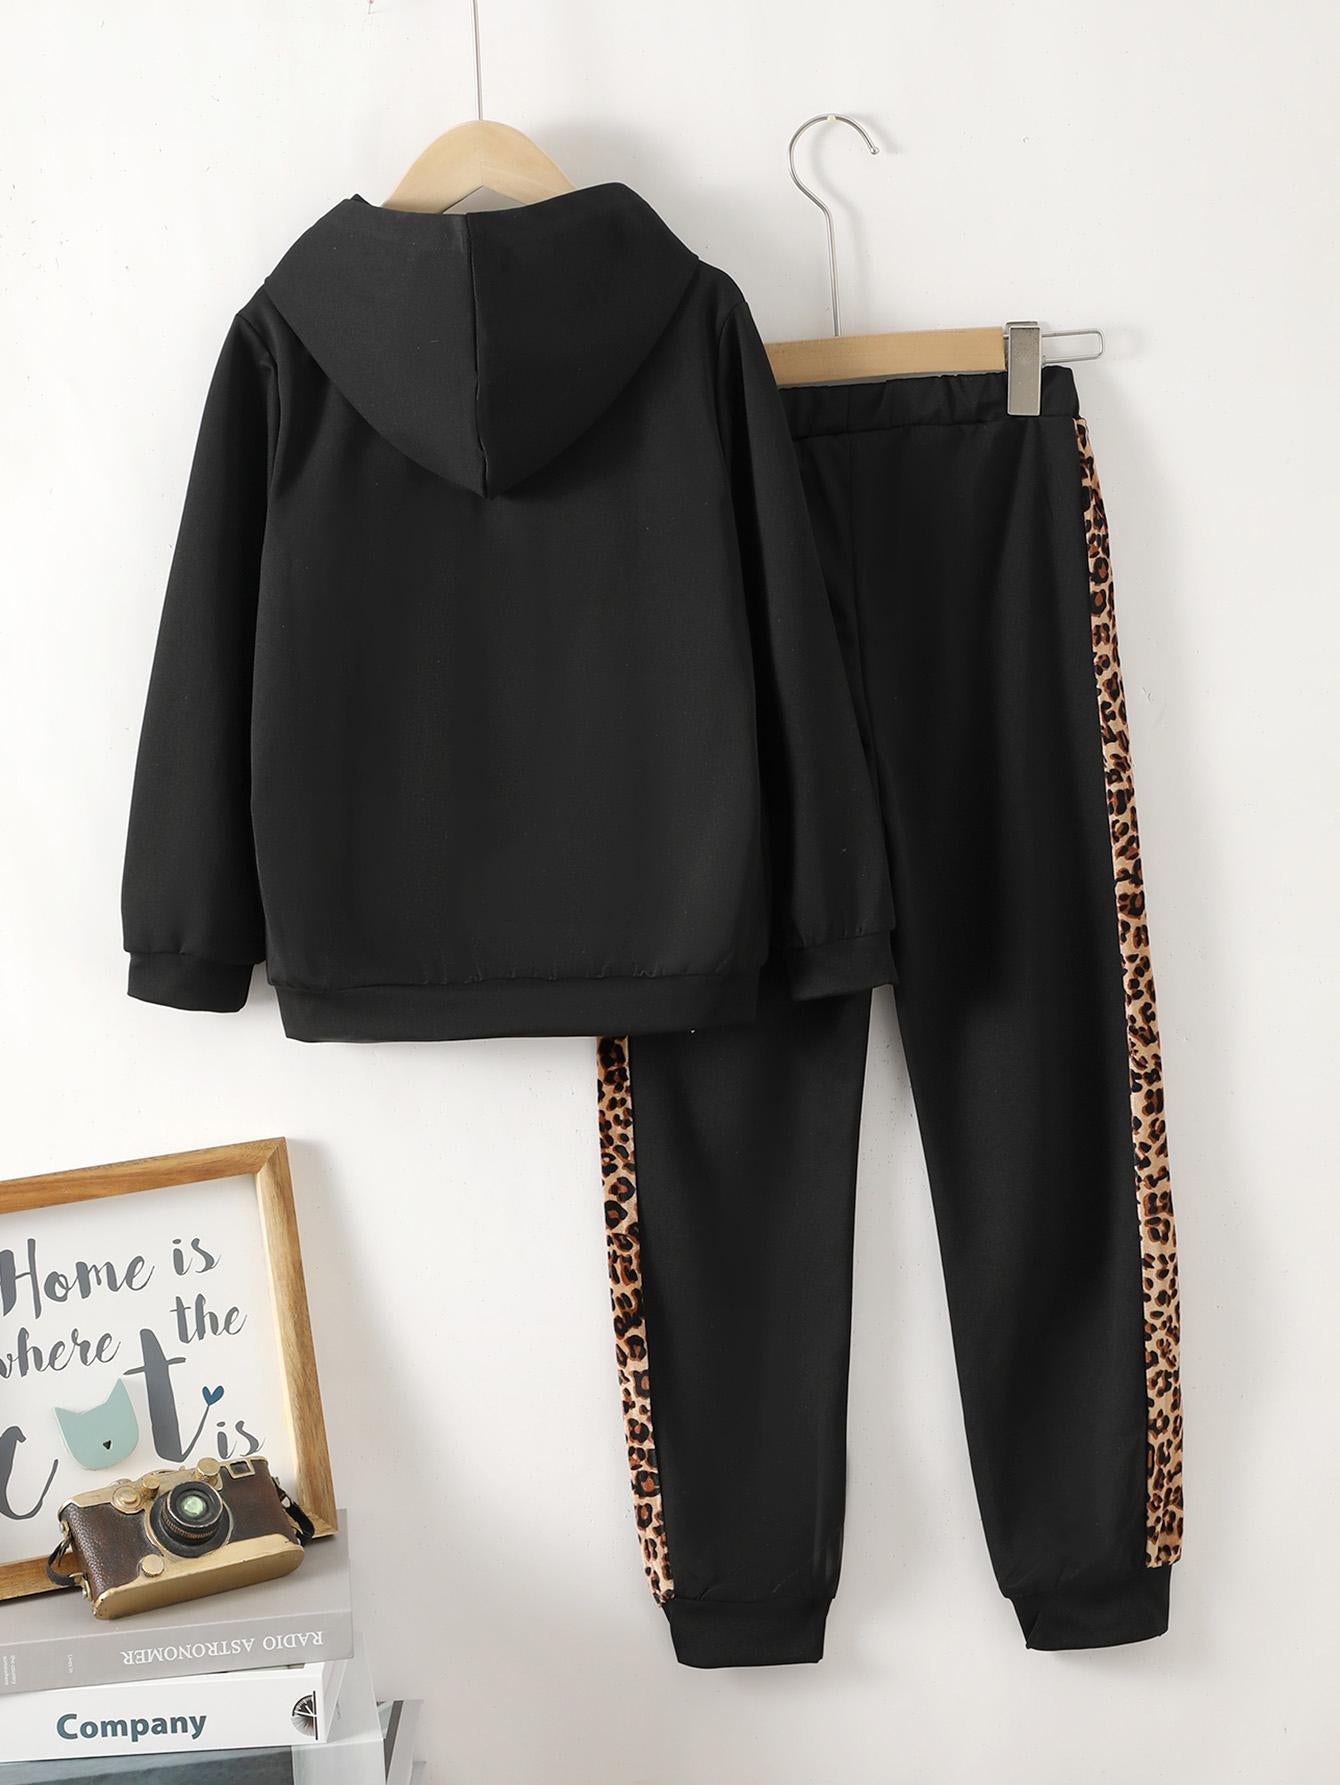 8-14Y Ready Stock 2pcs Girls Chic Clothes Leopard Graphic Hoodie Sweatshirt Top & Casual Side Taping Sweat Pants Trousers Set For Sports Leisure Vacation Outwear Kids Spring Fall Outfit Black Catpapa 462304003